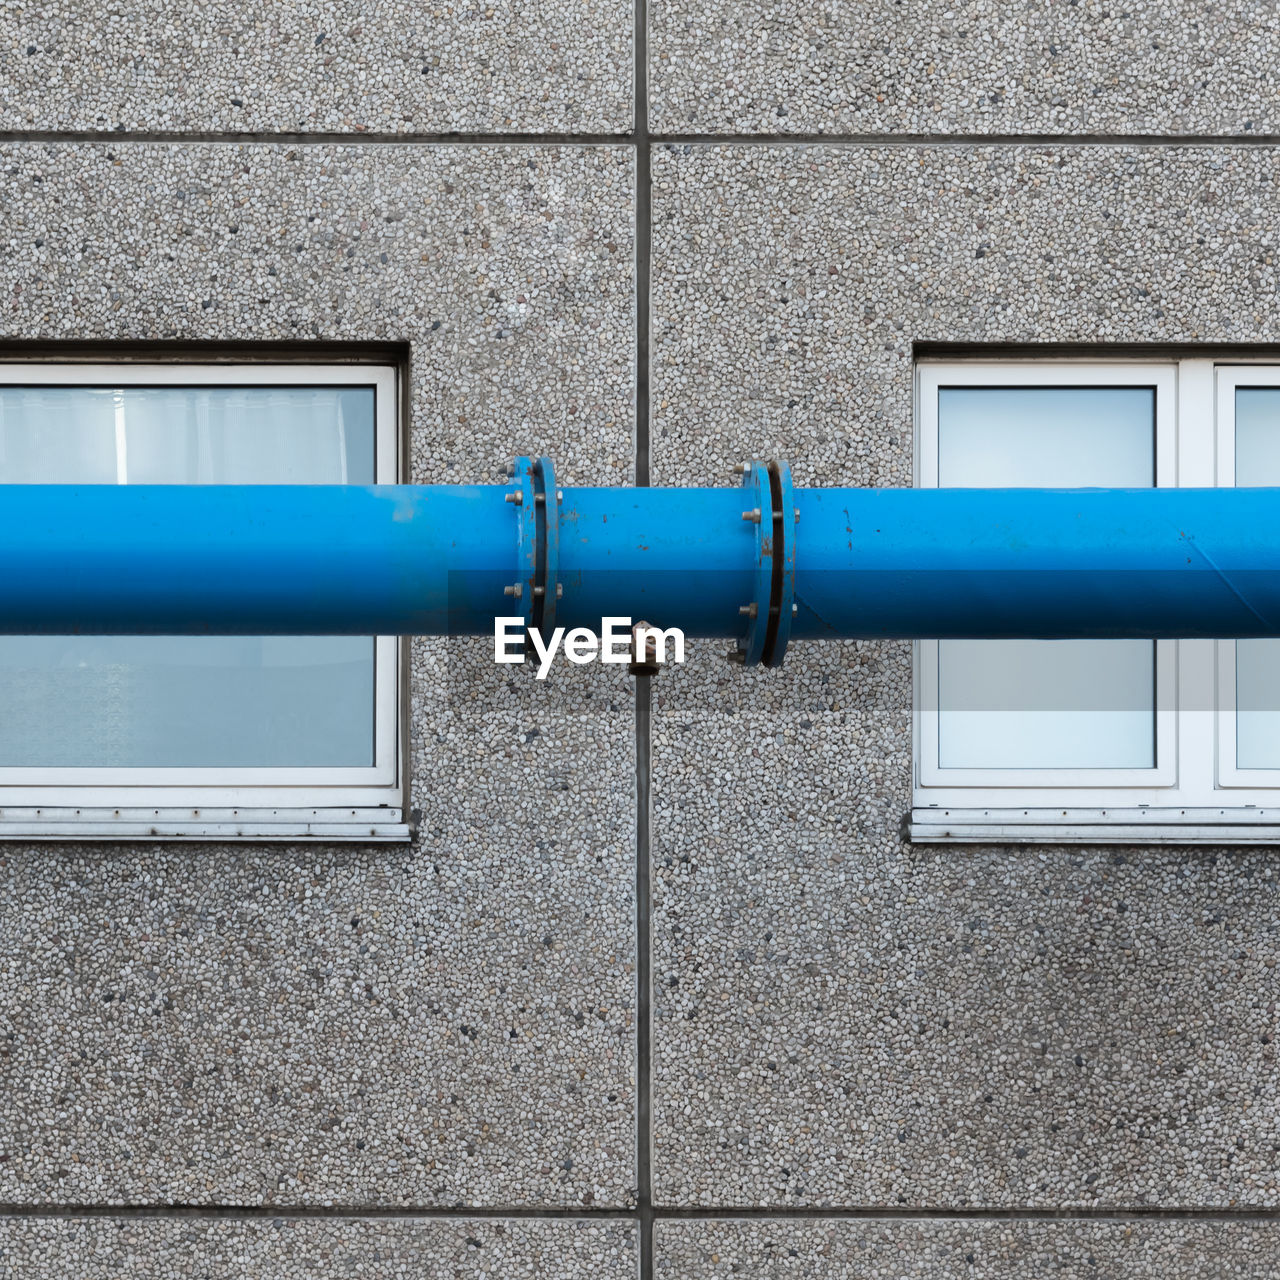 The blue water pipe in front of the windows of the prefabricated house